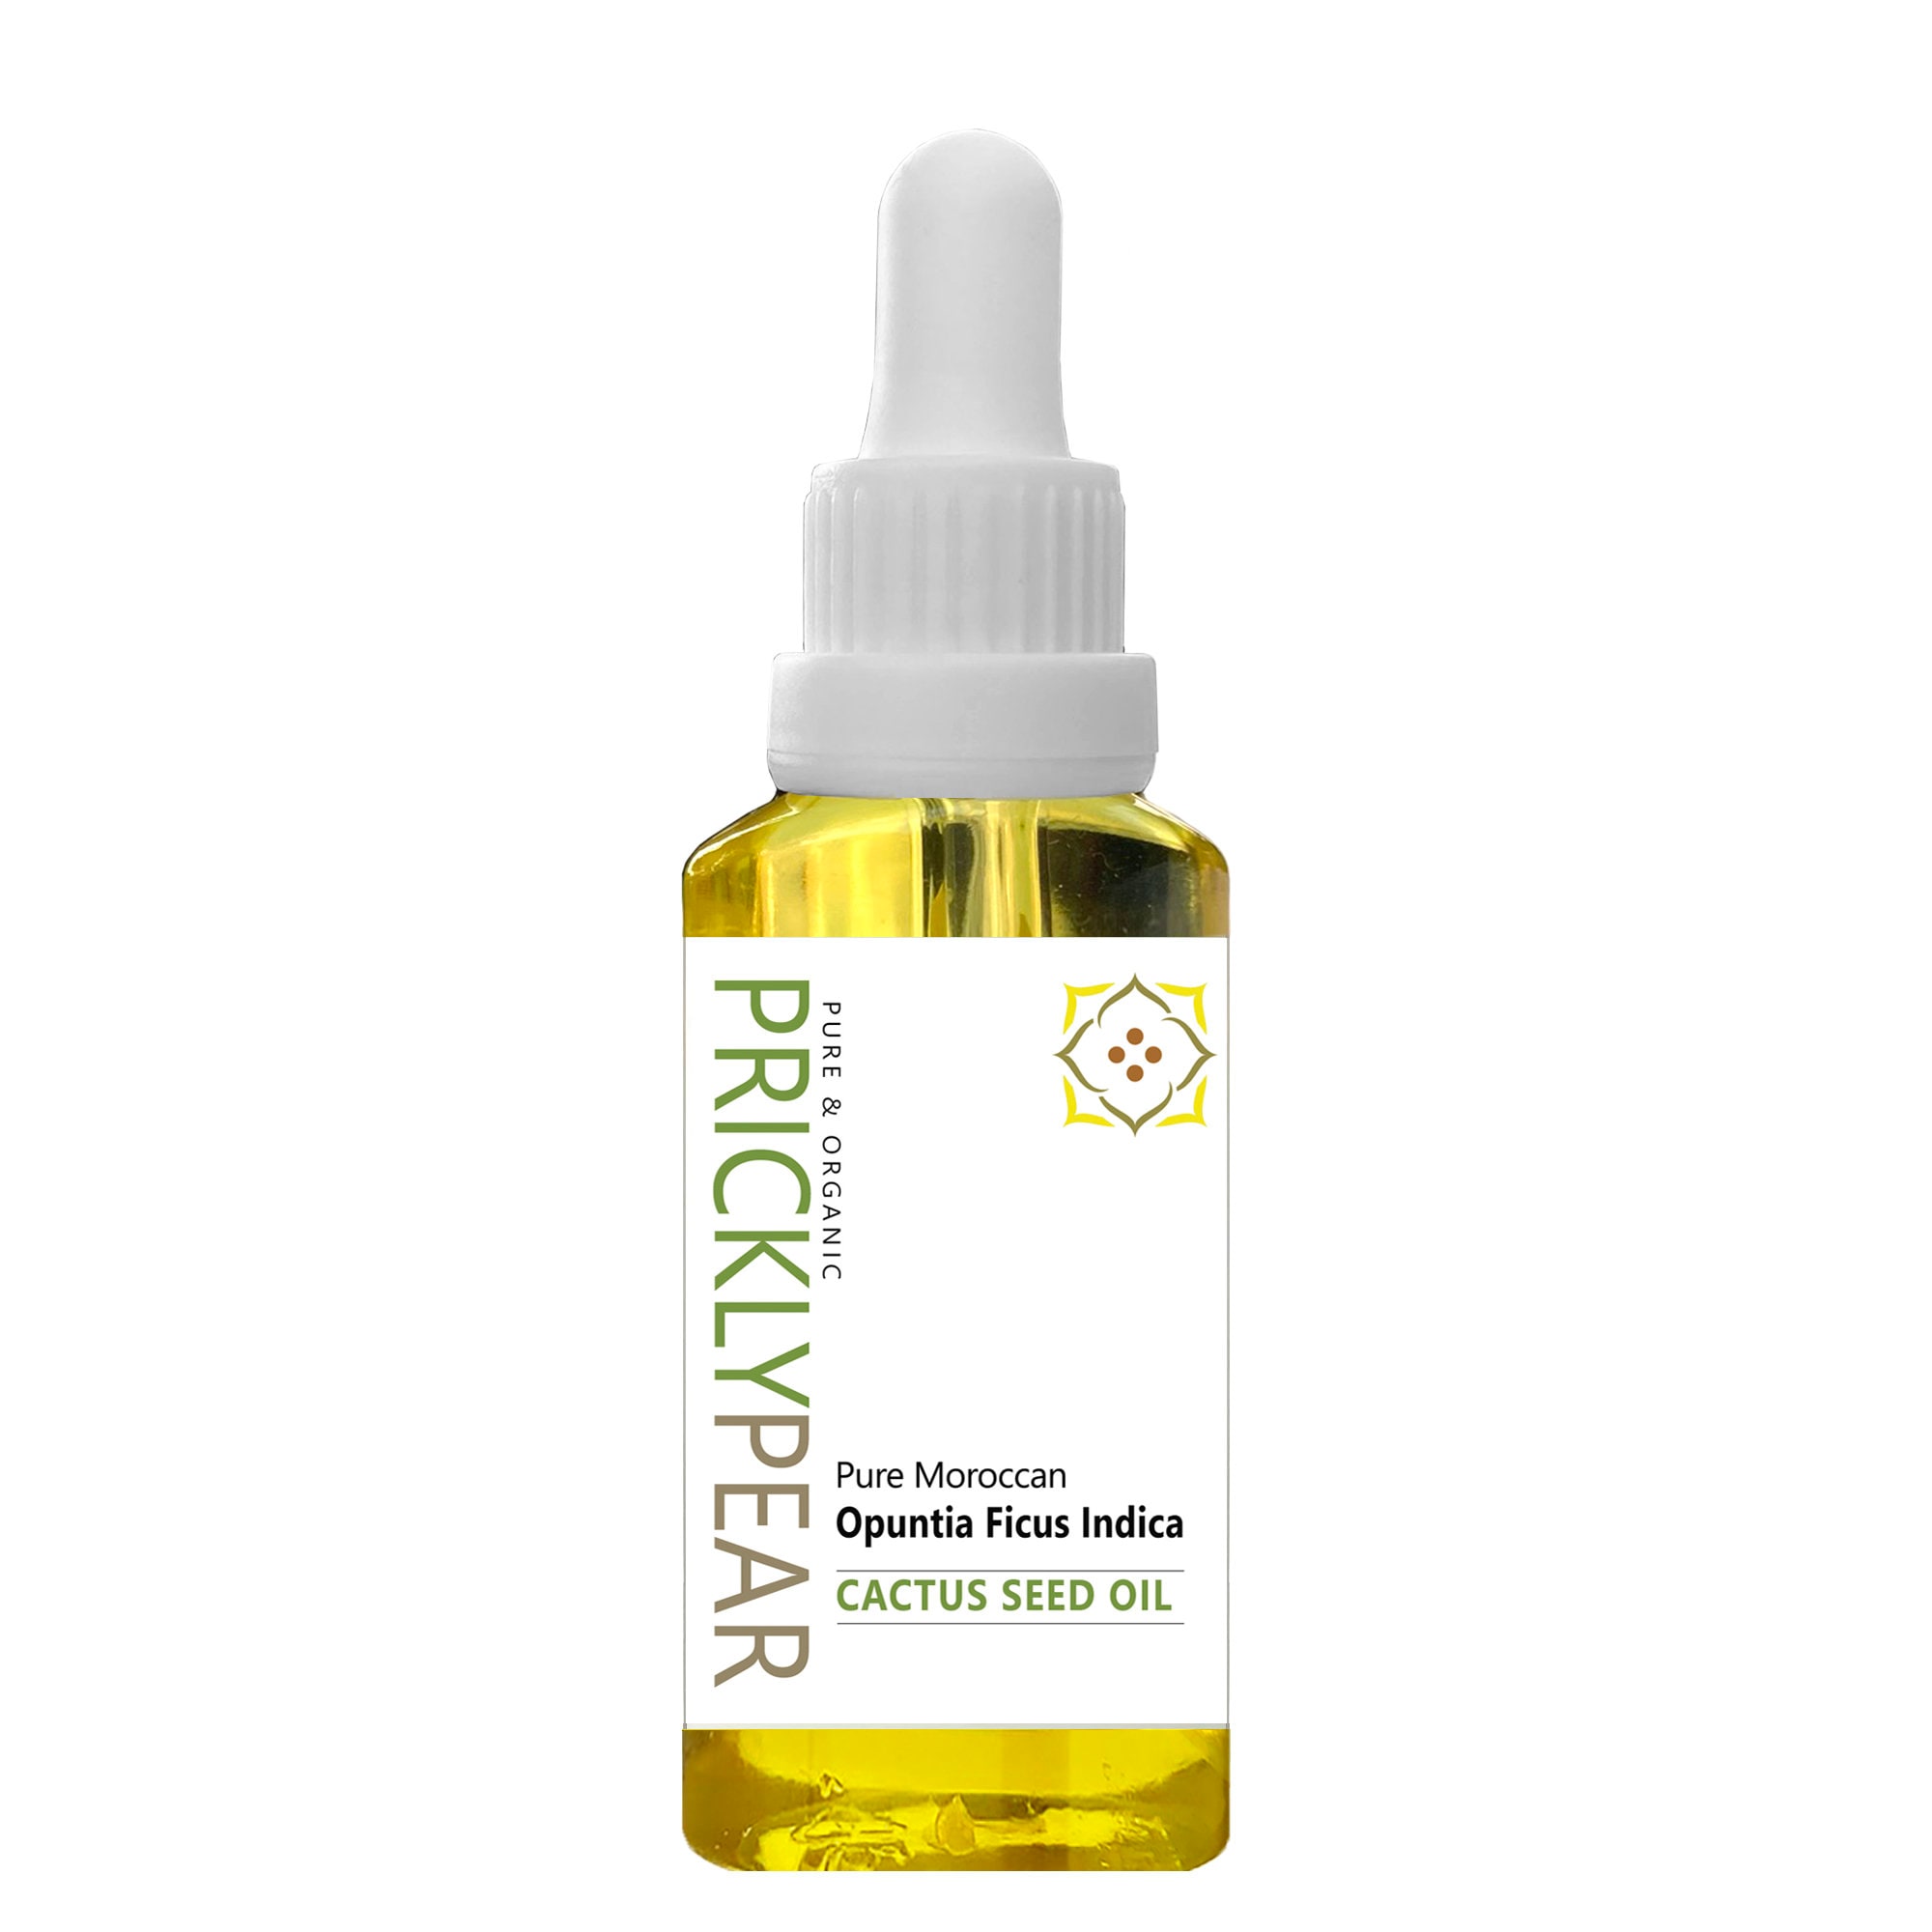 FACIAL OiL: Prickly Pear Oil (30ml), JUSTBLiSS Soap